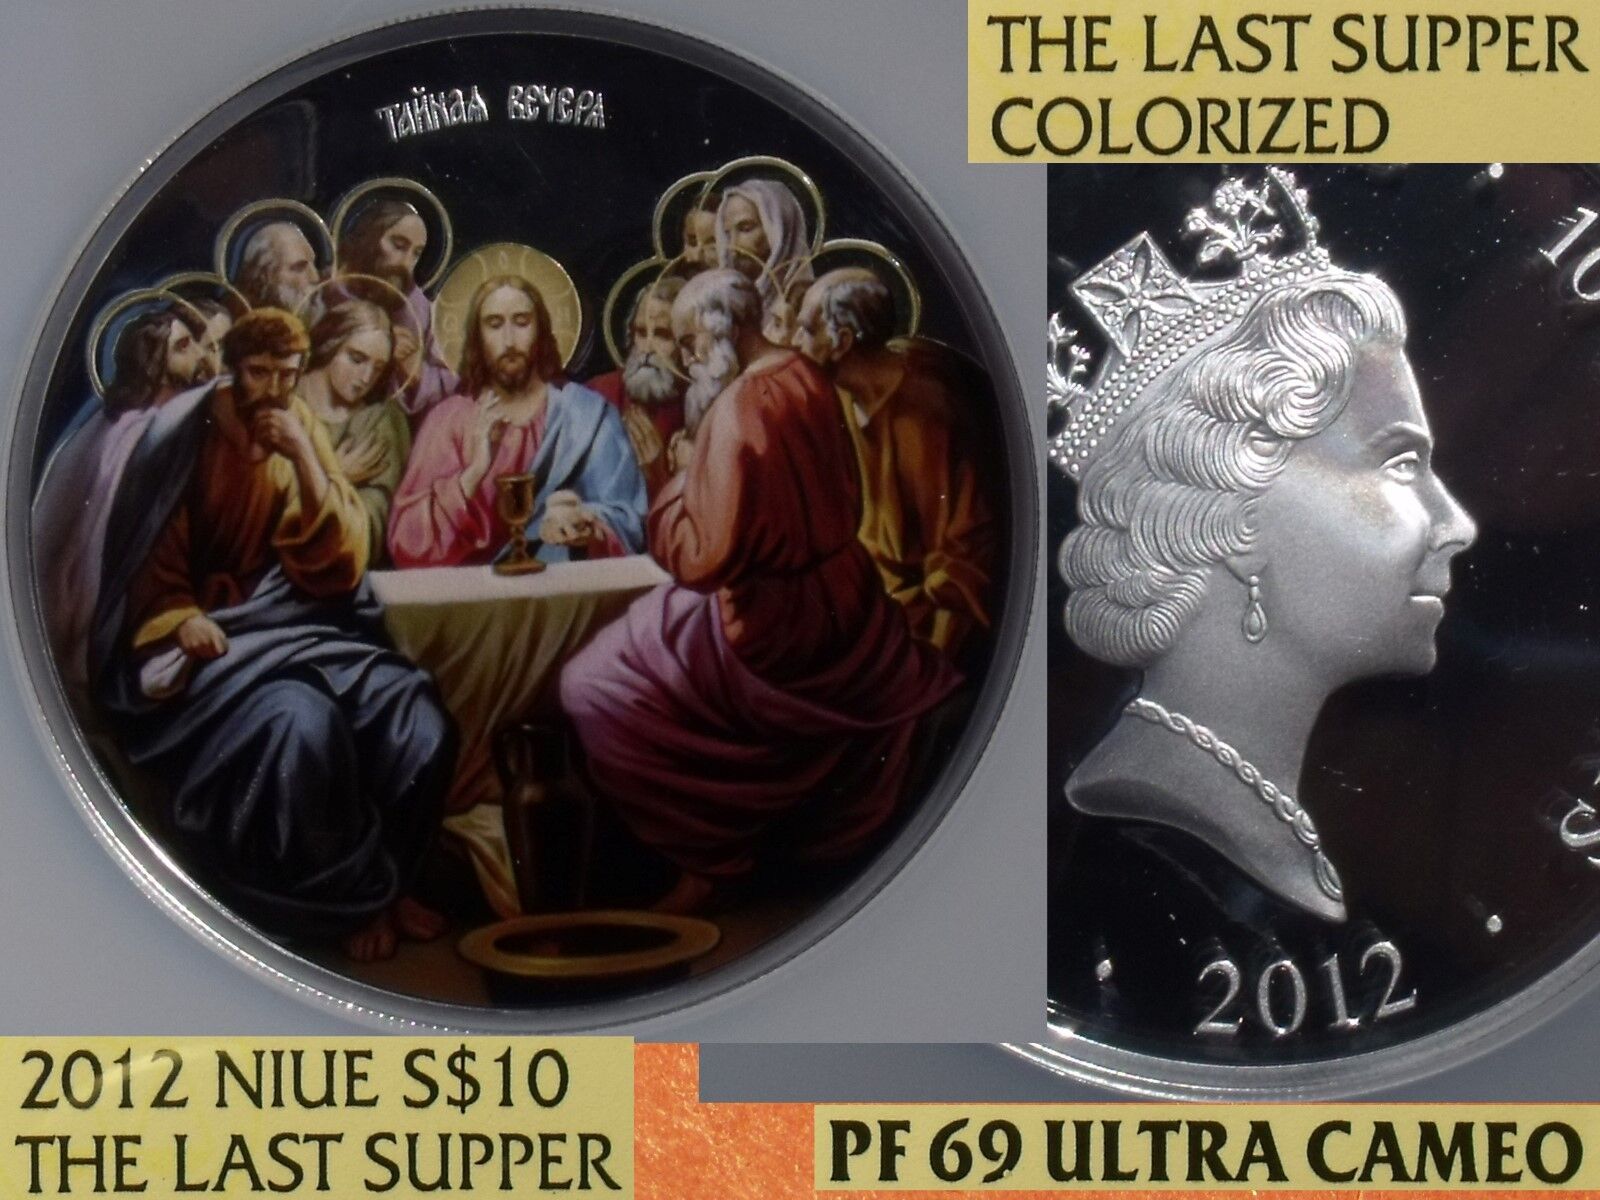 Niue 2012 $10~The Last Supper Colorized~RARE 500 Minted~NGC PF69 UC~Highest~5oz